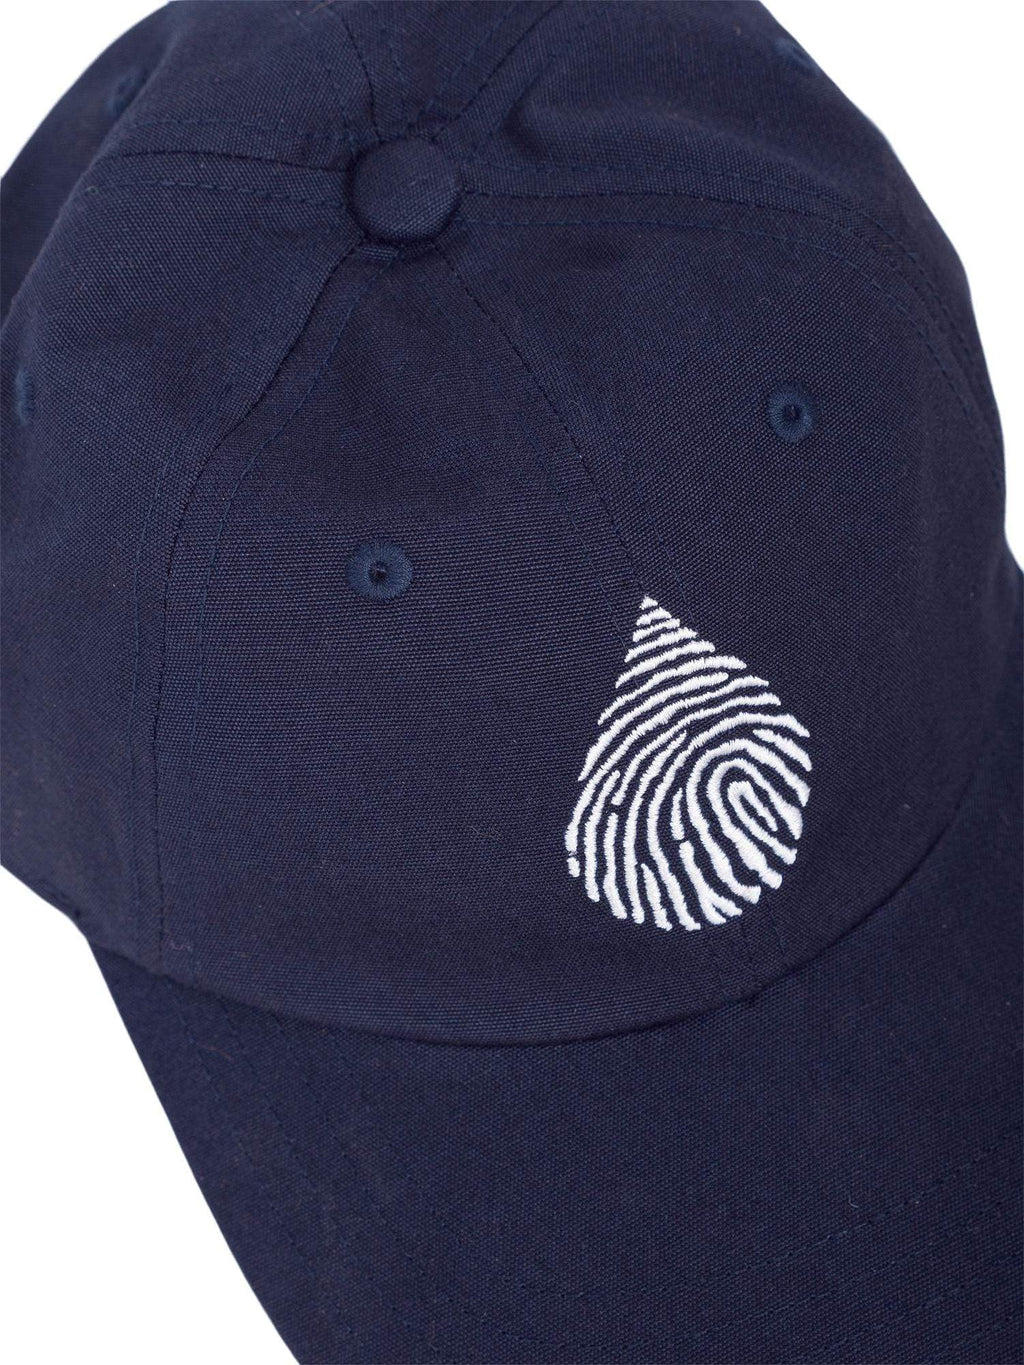 Close up top down view of a waterlust logo embroidered in white on a blue organic cotton dad cap hat